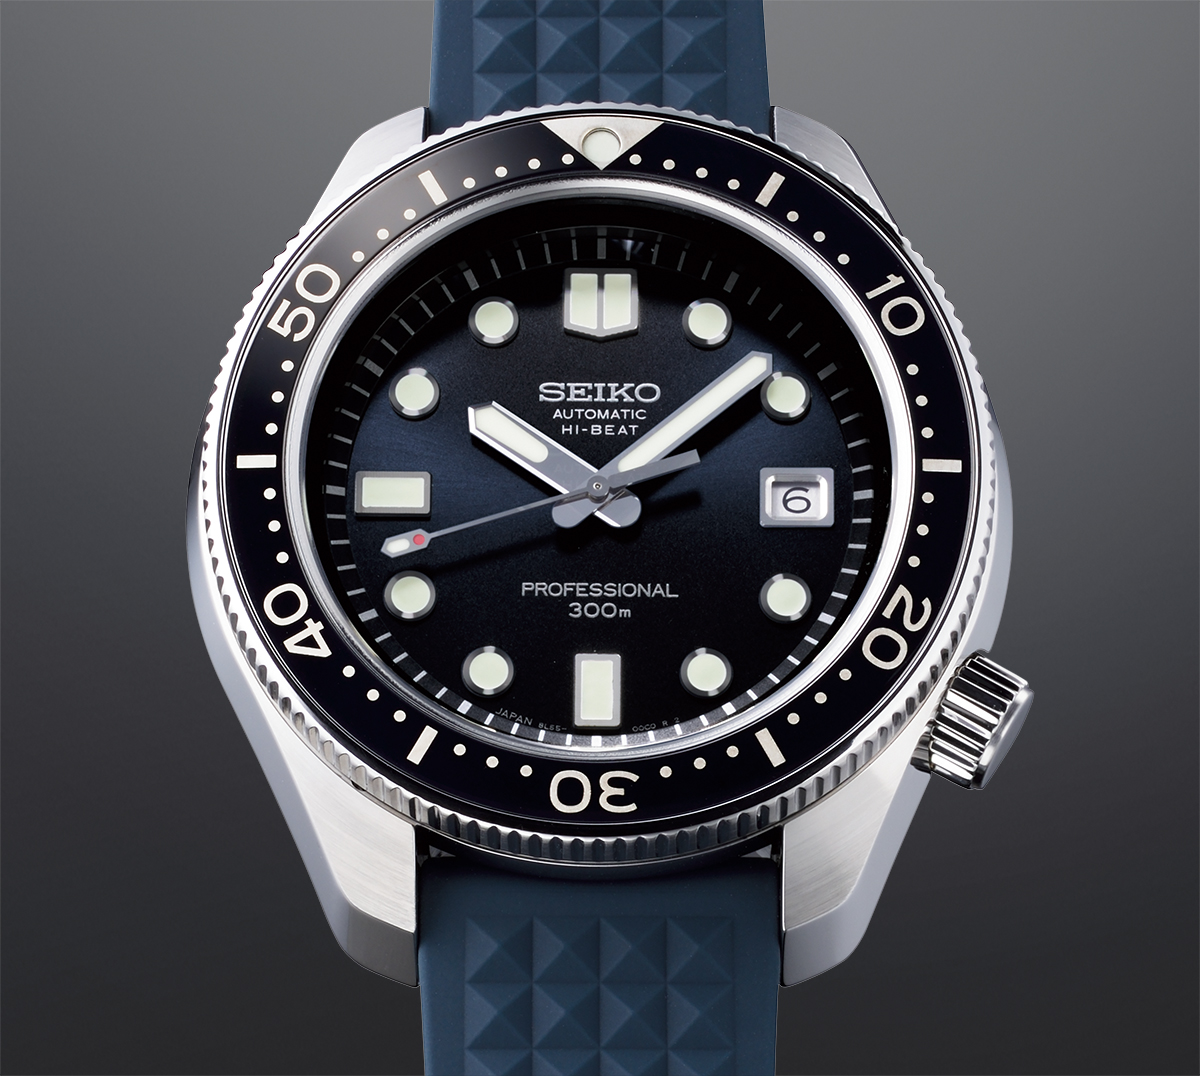 55 Years Seiko Prospex Excellence: Four New Takes On The Classics | aBlogtoWatch